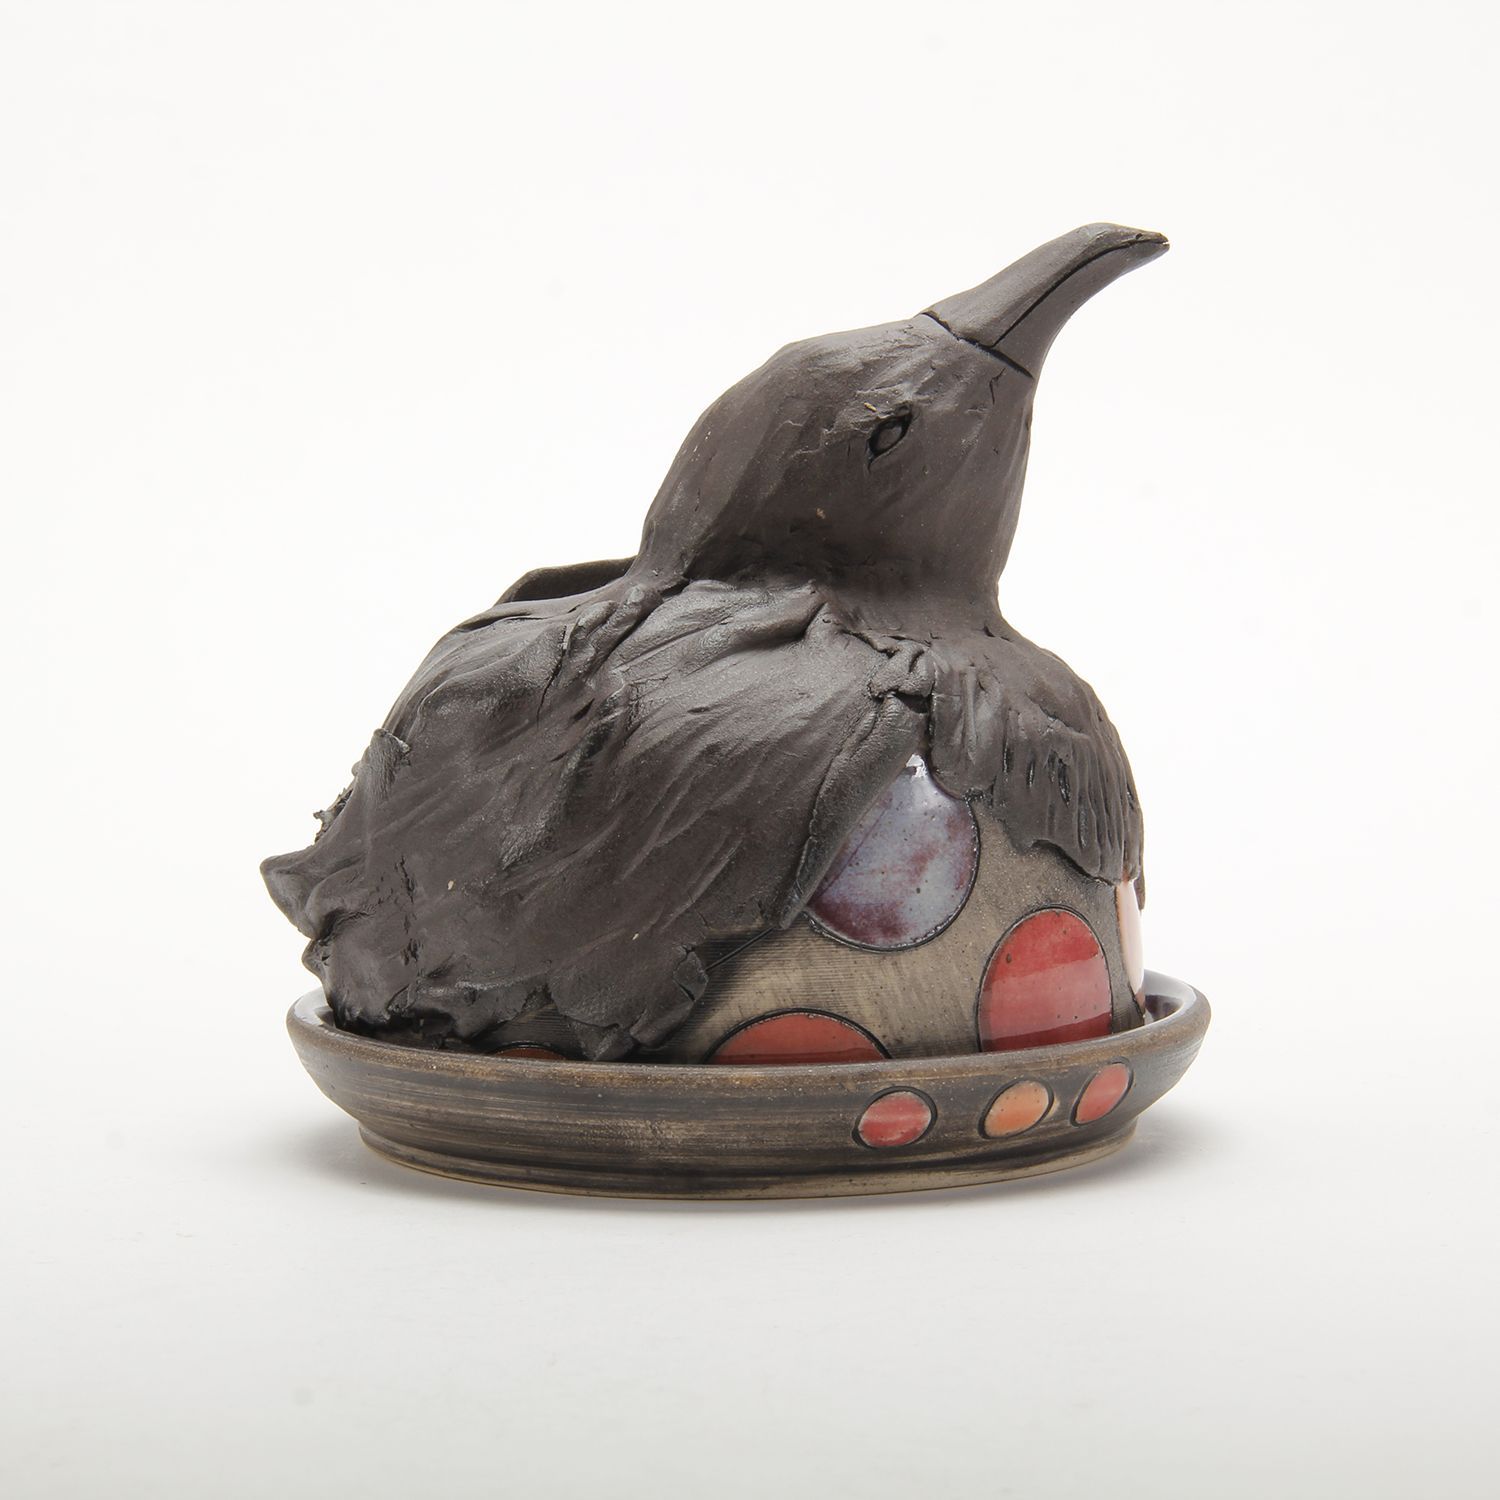 Marla Benton: Butter Dish Product Image 2 of 3